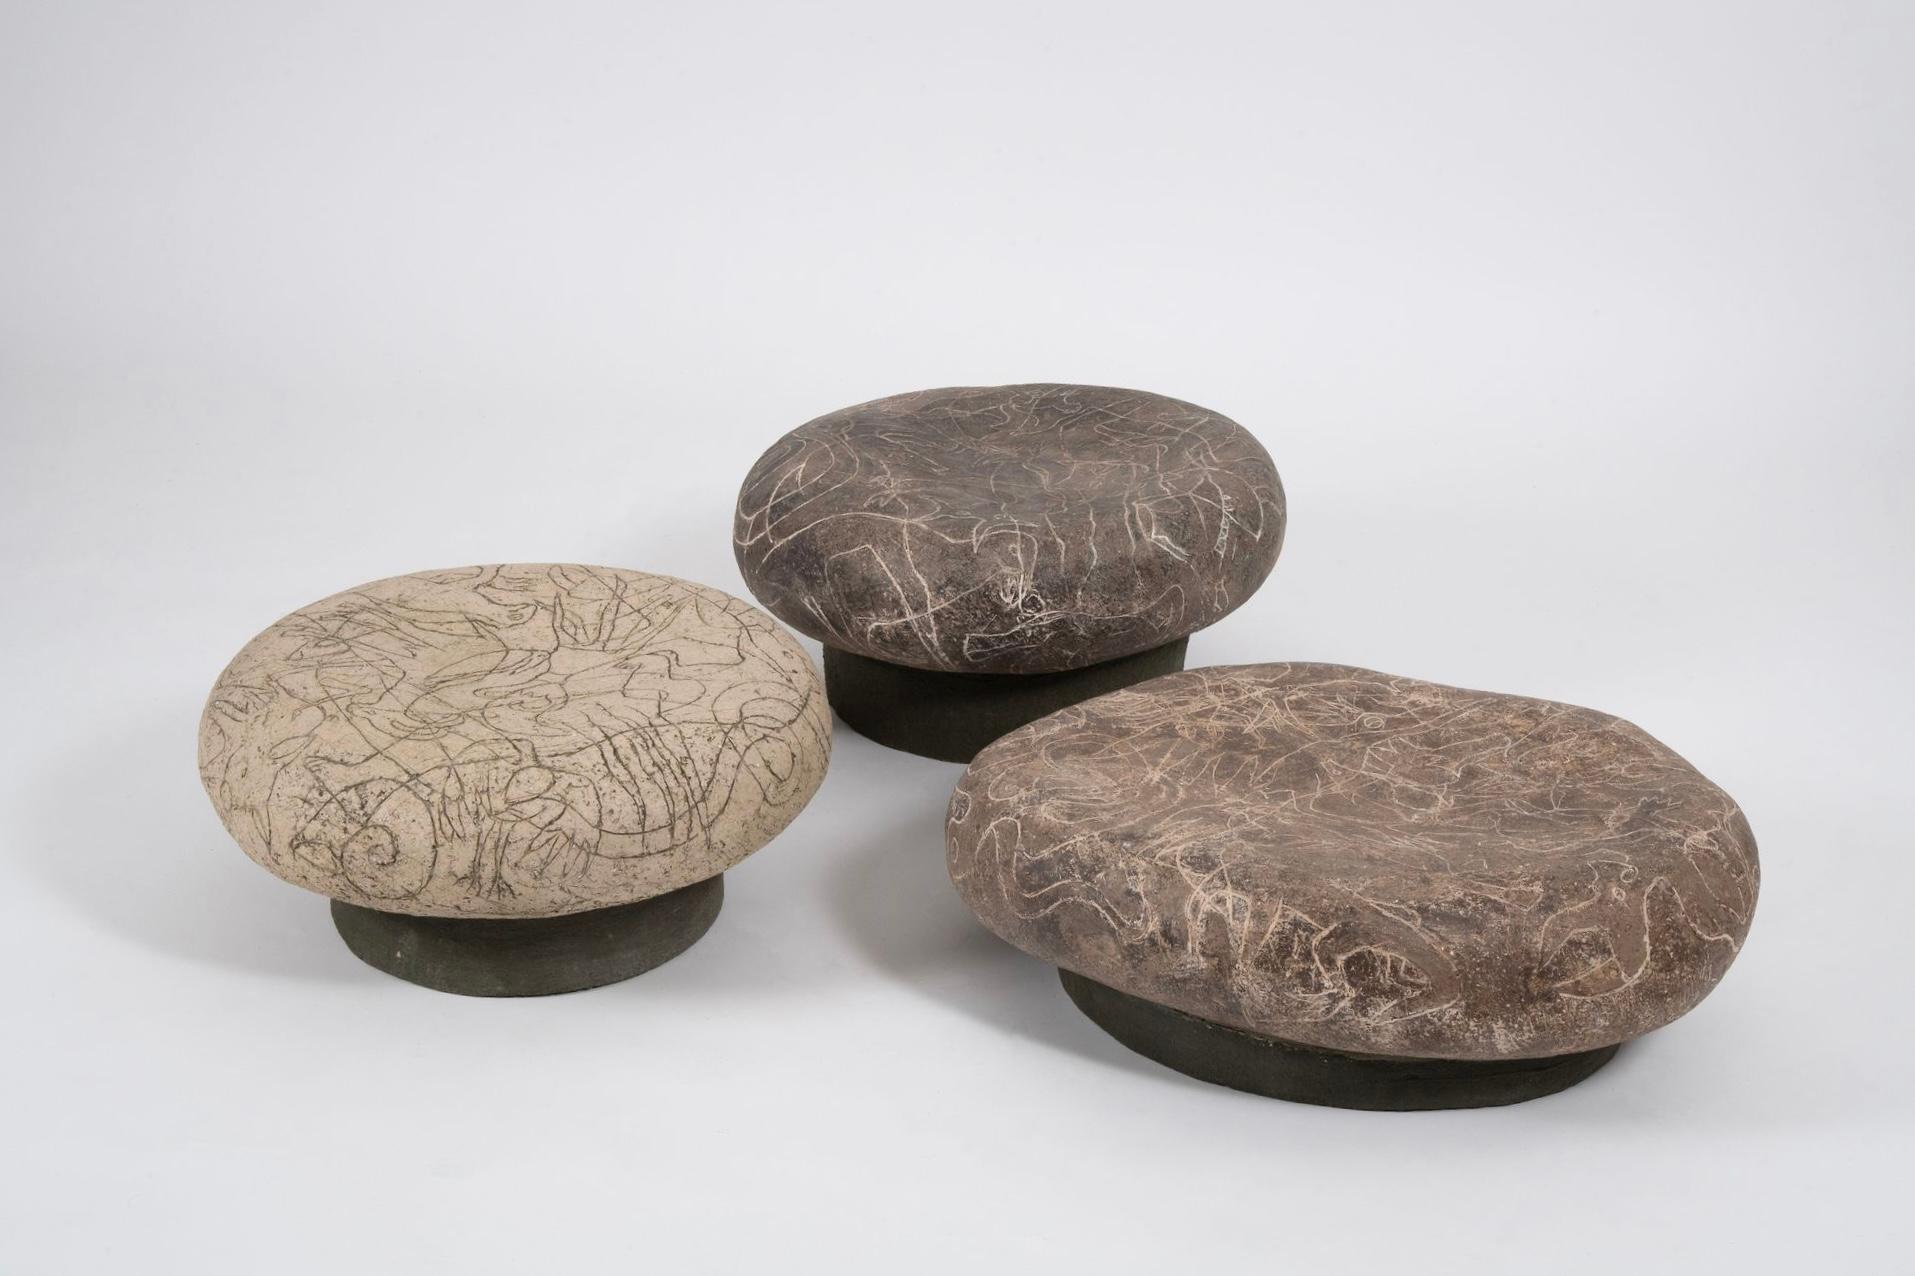 Pebble Tables by Agnès Debizet 
Material: Carved stoneware
Dimensions: H 20/24/25 x L 61/50/52 x 50/50/51 cm
Year: 2022
Type: one-of-a-kind

The simple yet powerful “Pebble Coffee Tables” made from ceramic by Agnès Debizet retains a sculptural